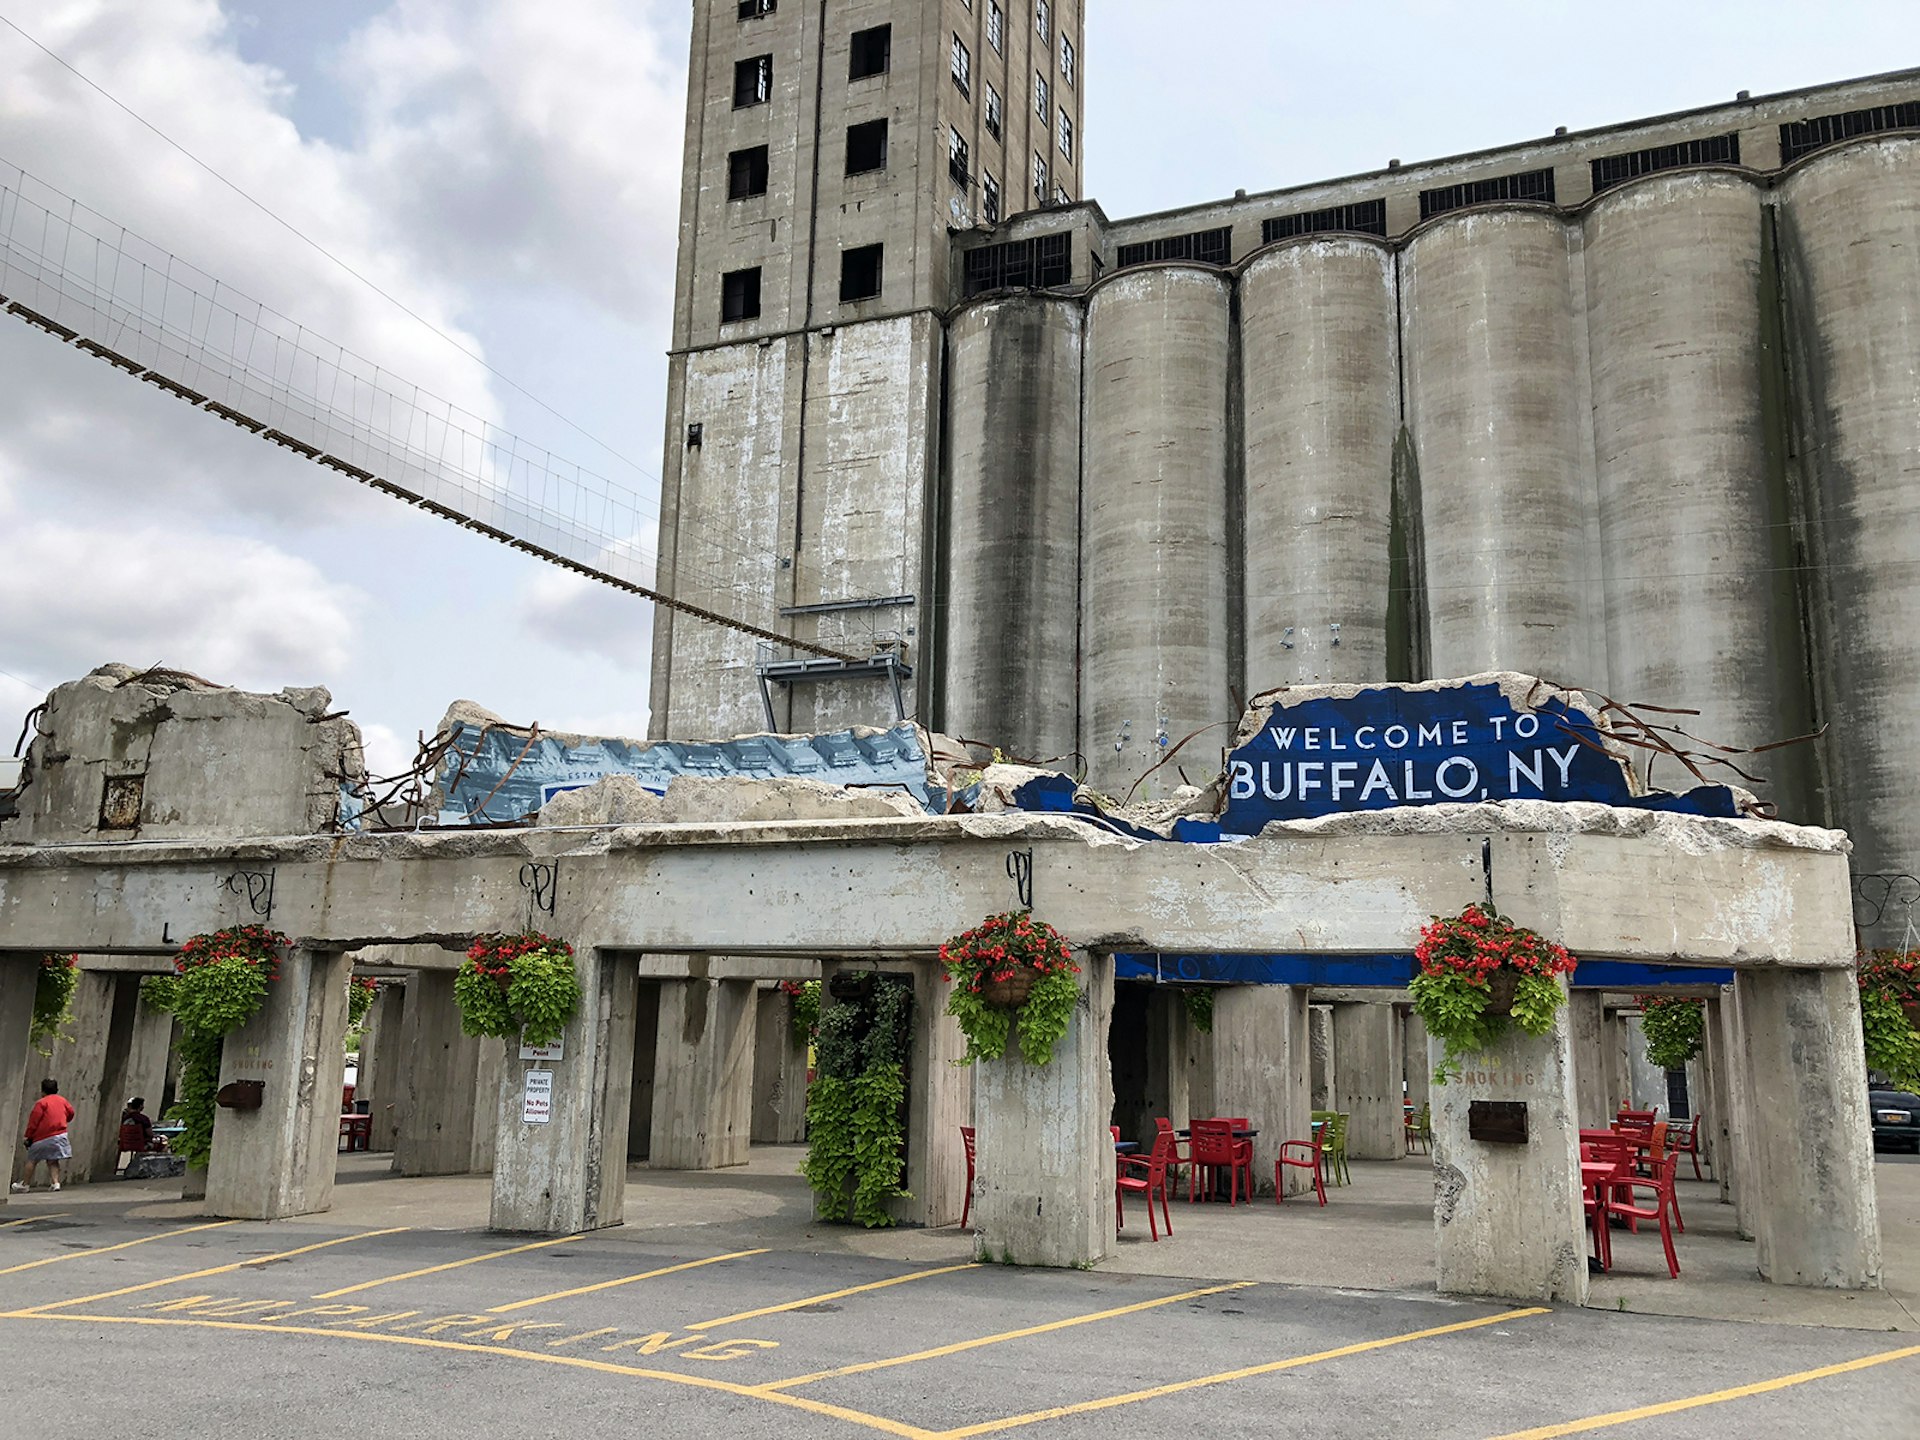 A rope bridge stretches between two grain silos on the zipline course at RiverWorks, above the broken foundations of two other grain silos topped with a painted 'Welcome to Buffalo' sign